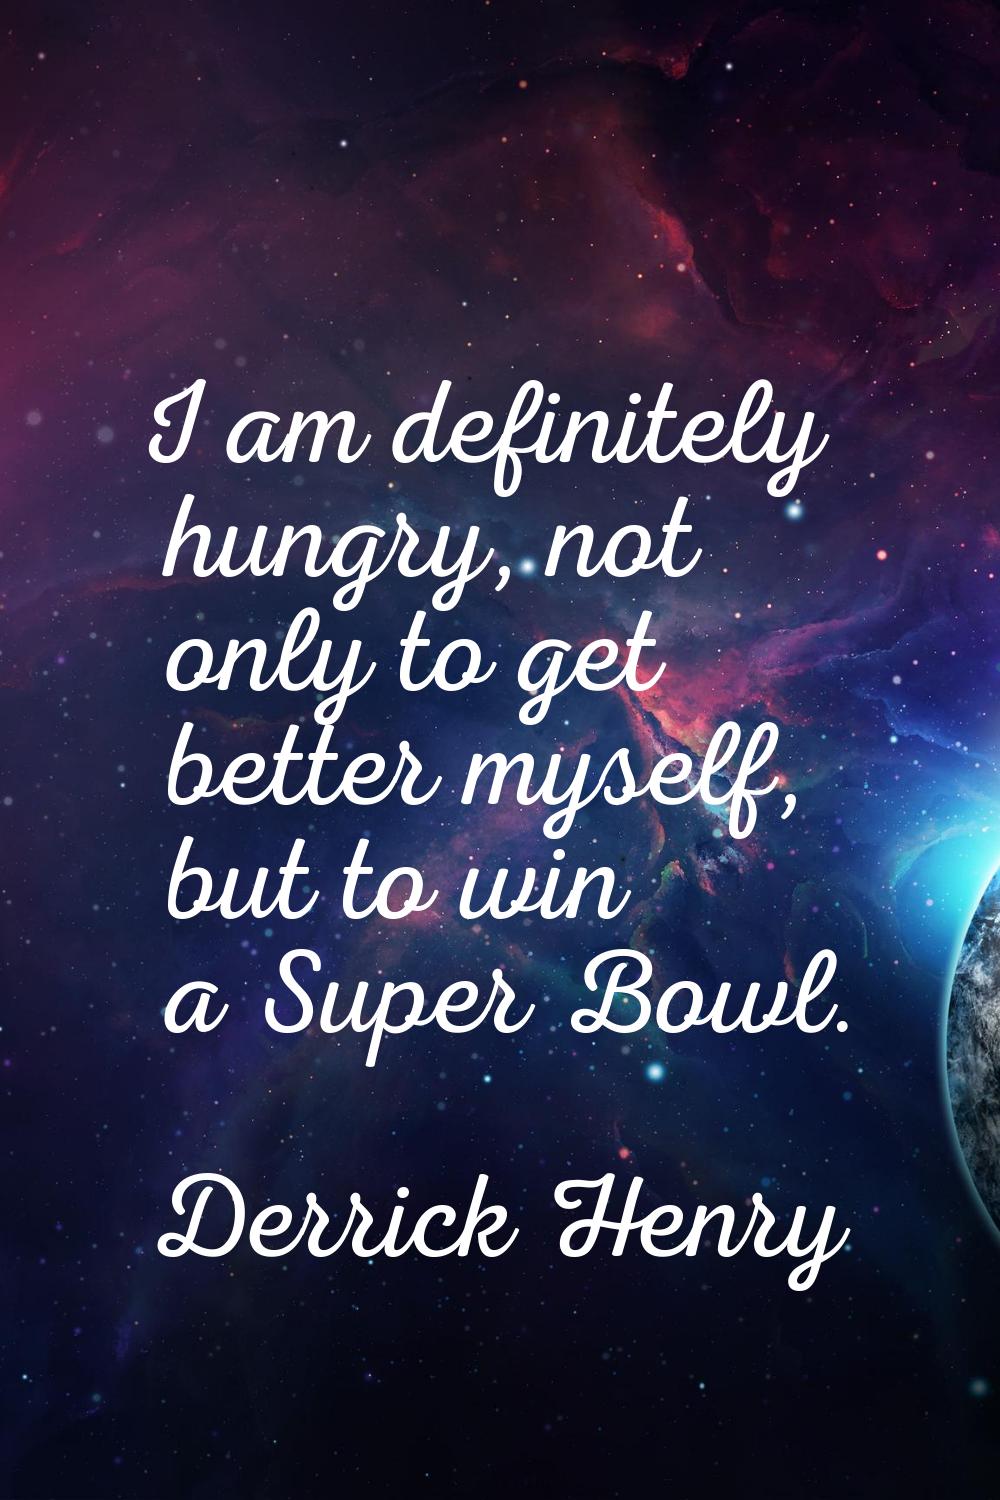 I am definitely hungry, not only to get better myself, but to win a Super Bowl.